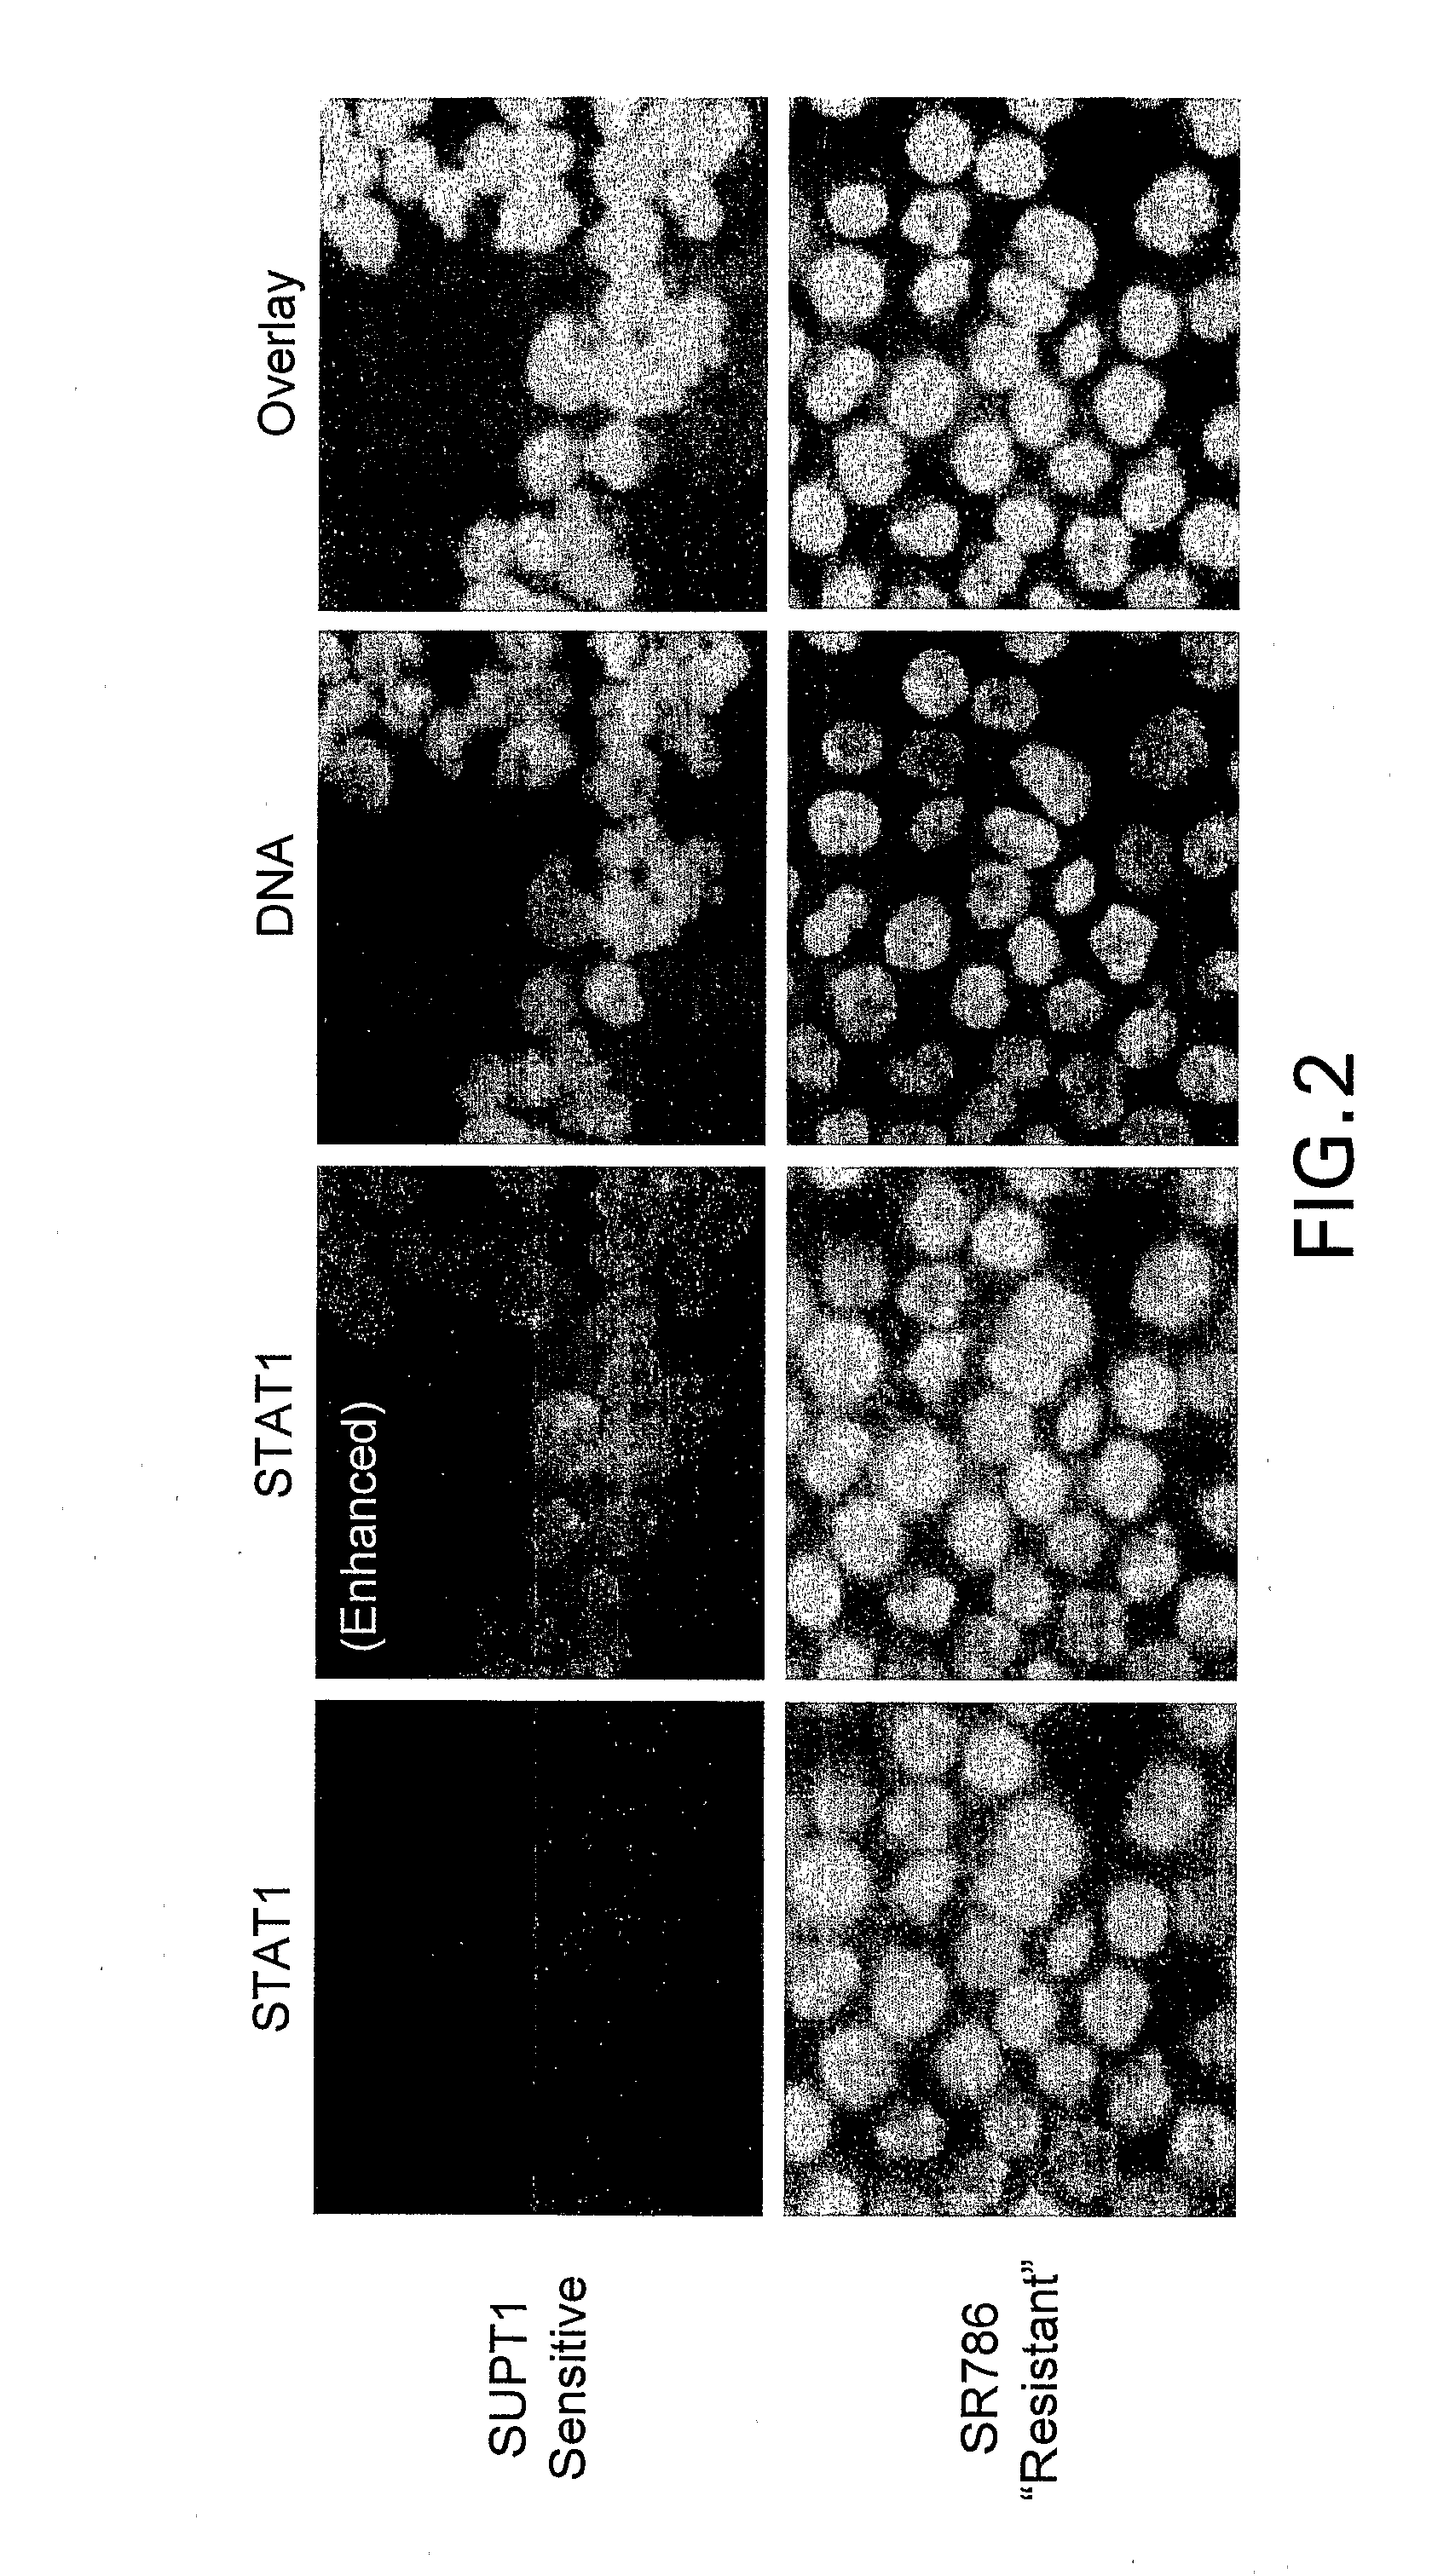 Methods for Predicting Treatment Response Based On the Expression Profiles of Protein and Transcription Biomarkers